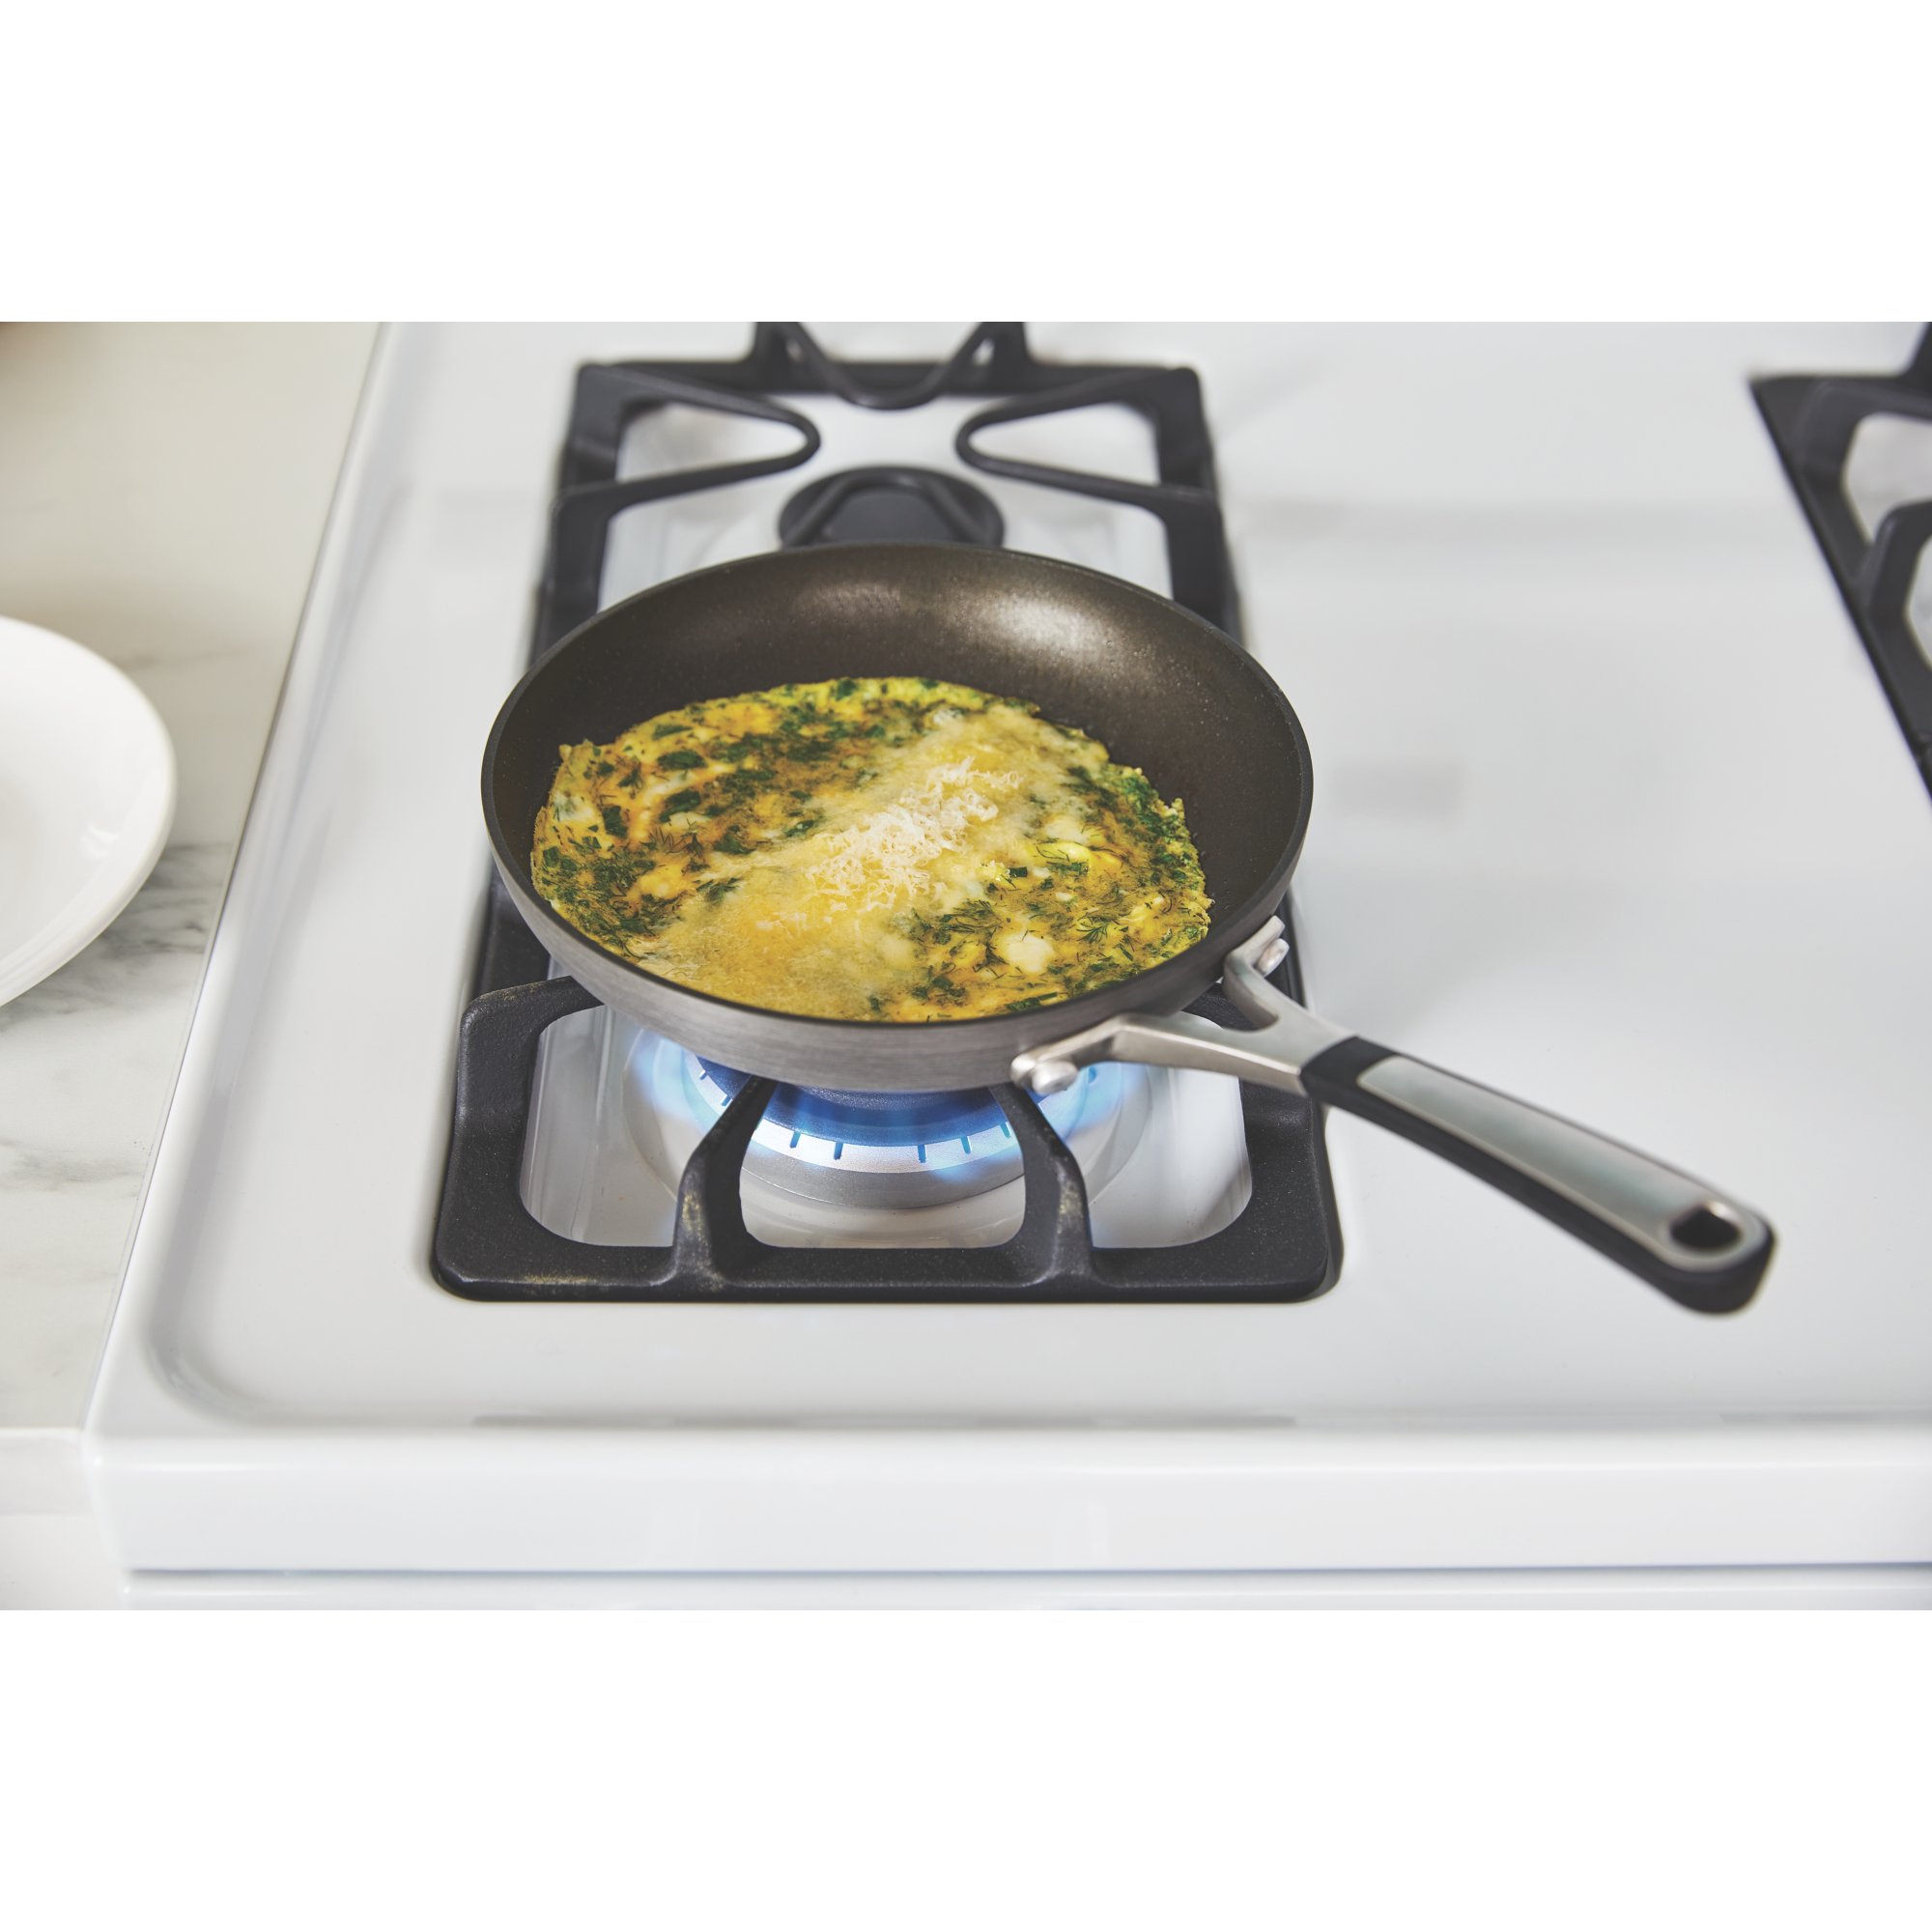 https://newellbrands.scene7.com/is/image/NewellRubbermaid/Calphalon-Cookware-Good-Tier-Nonstick-Simply-FryPan-high-angle-with-talent-with-food-7-1?wid=2000&hei=2000